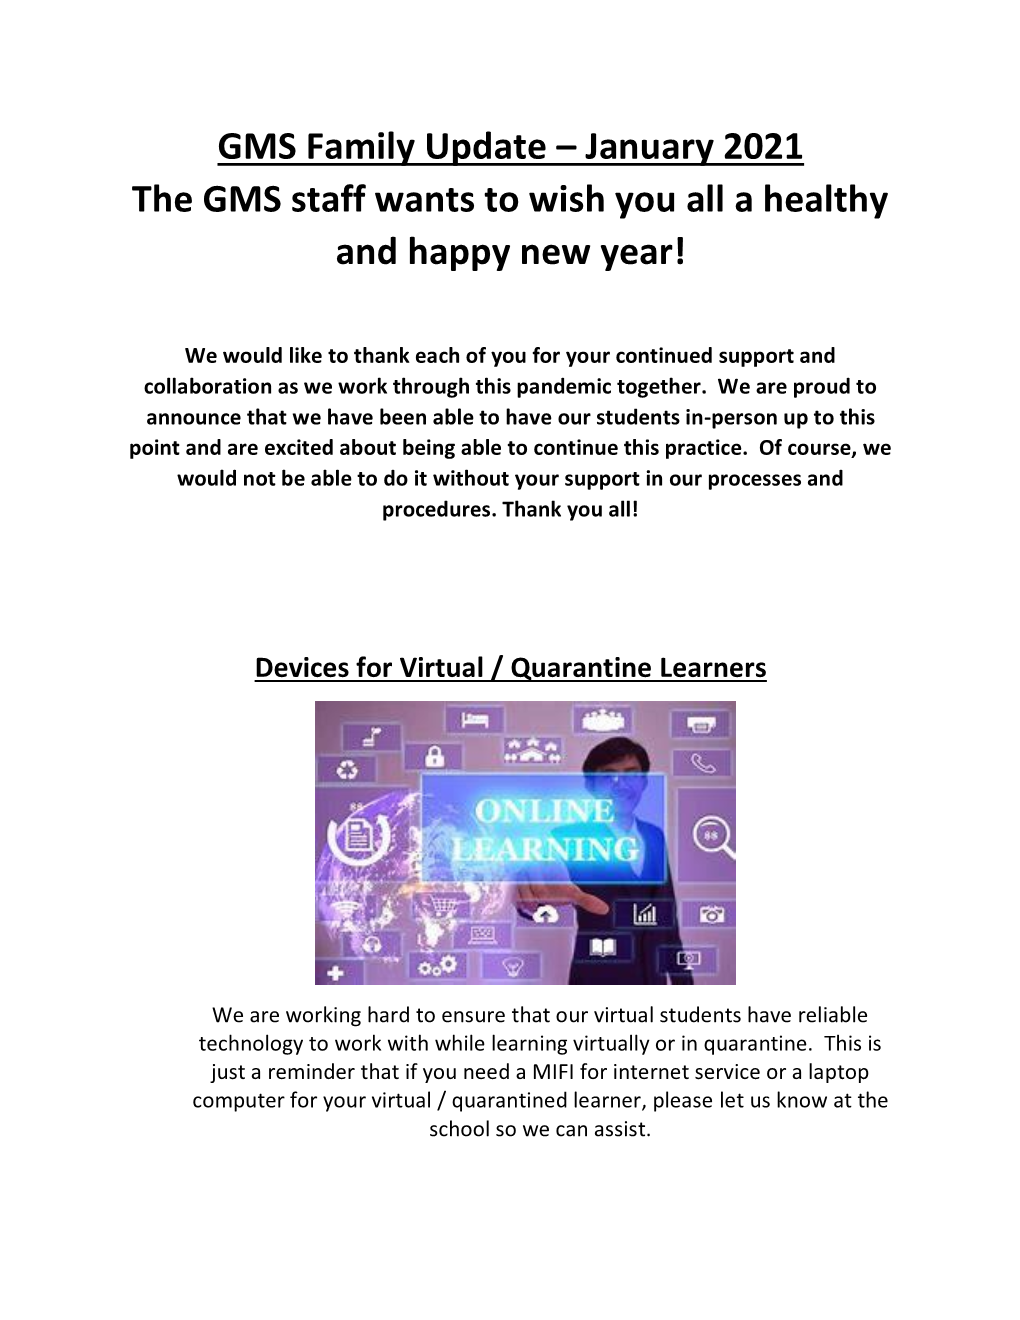 January 2021 the GMS Staff Wants to Wish You All a Healthy and Happy New Year!